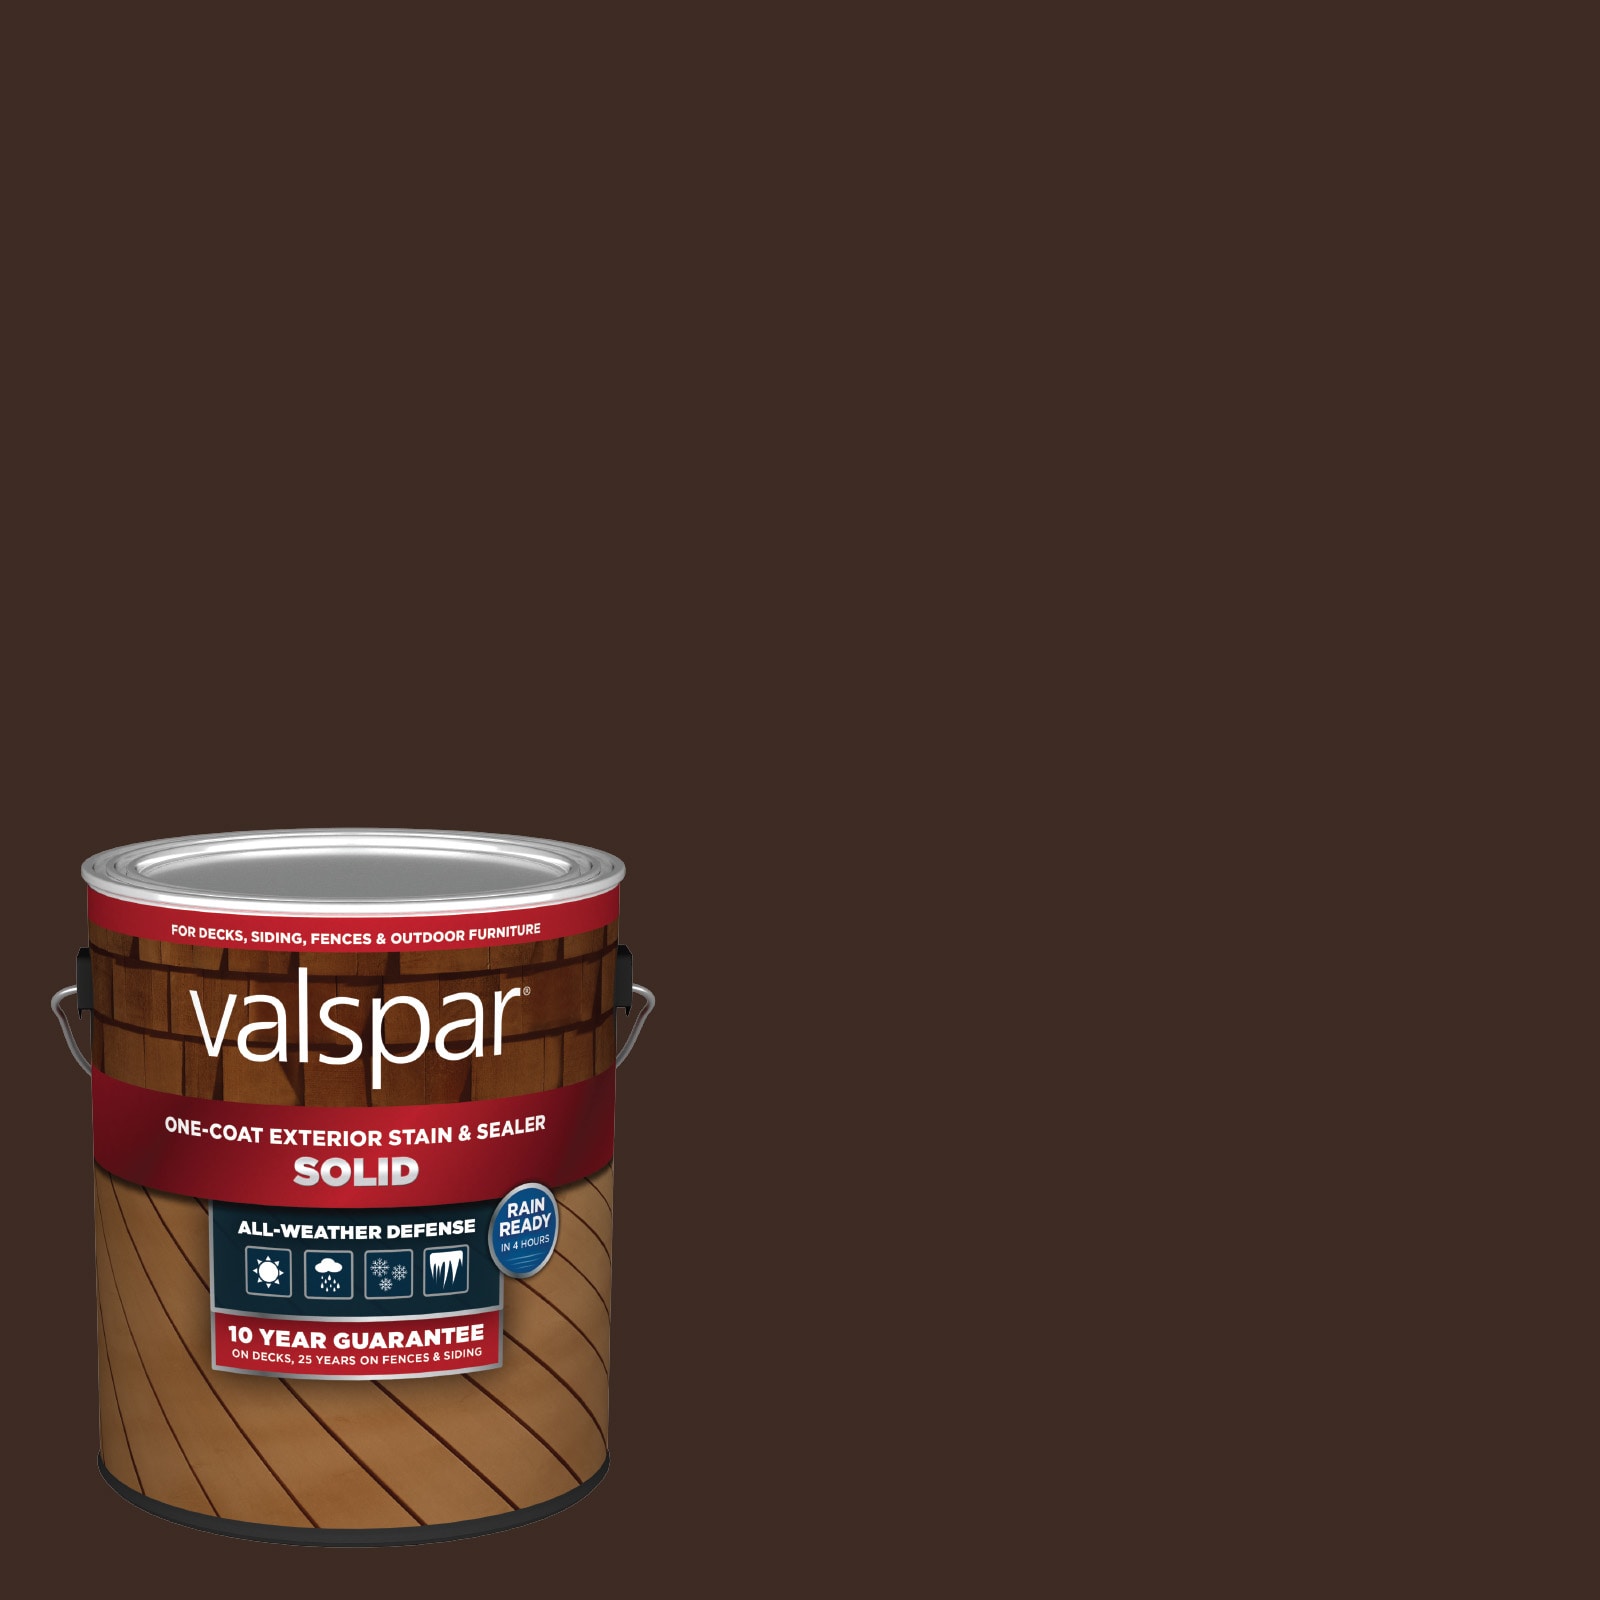 Classic Mahogany Solid Exterior Wood Stain and Sealer (1-Gallon) in Brown | - Valspar CLSSC MAHGNY-1028091